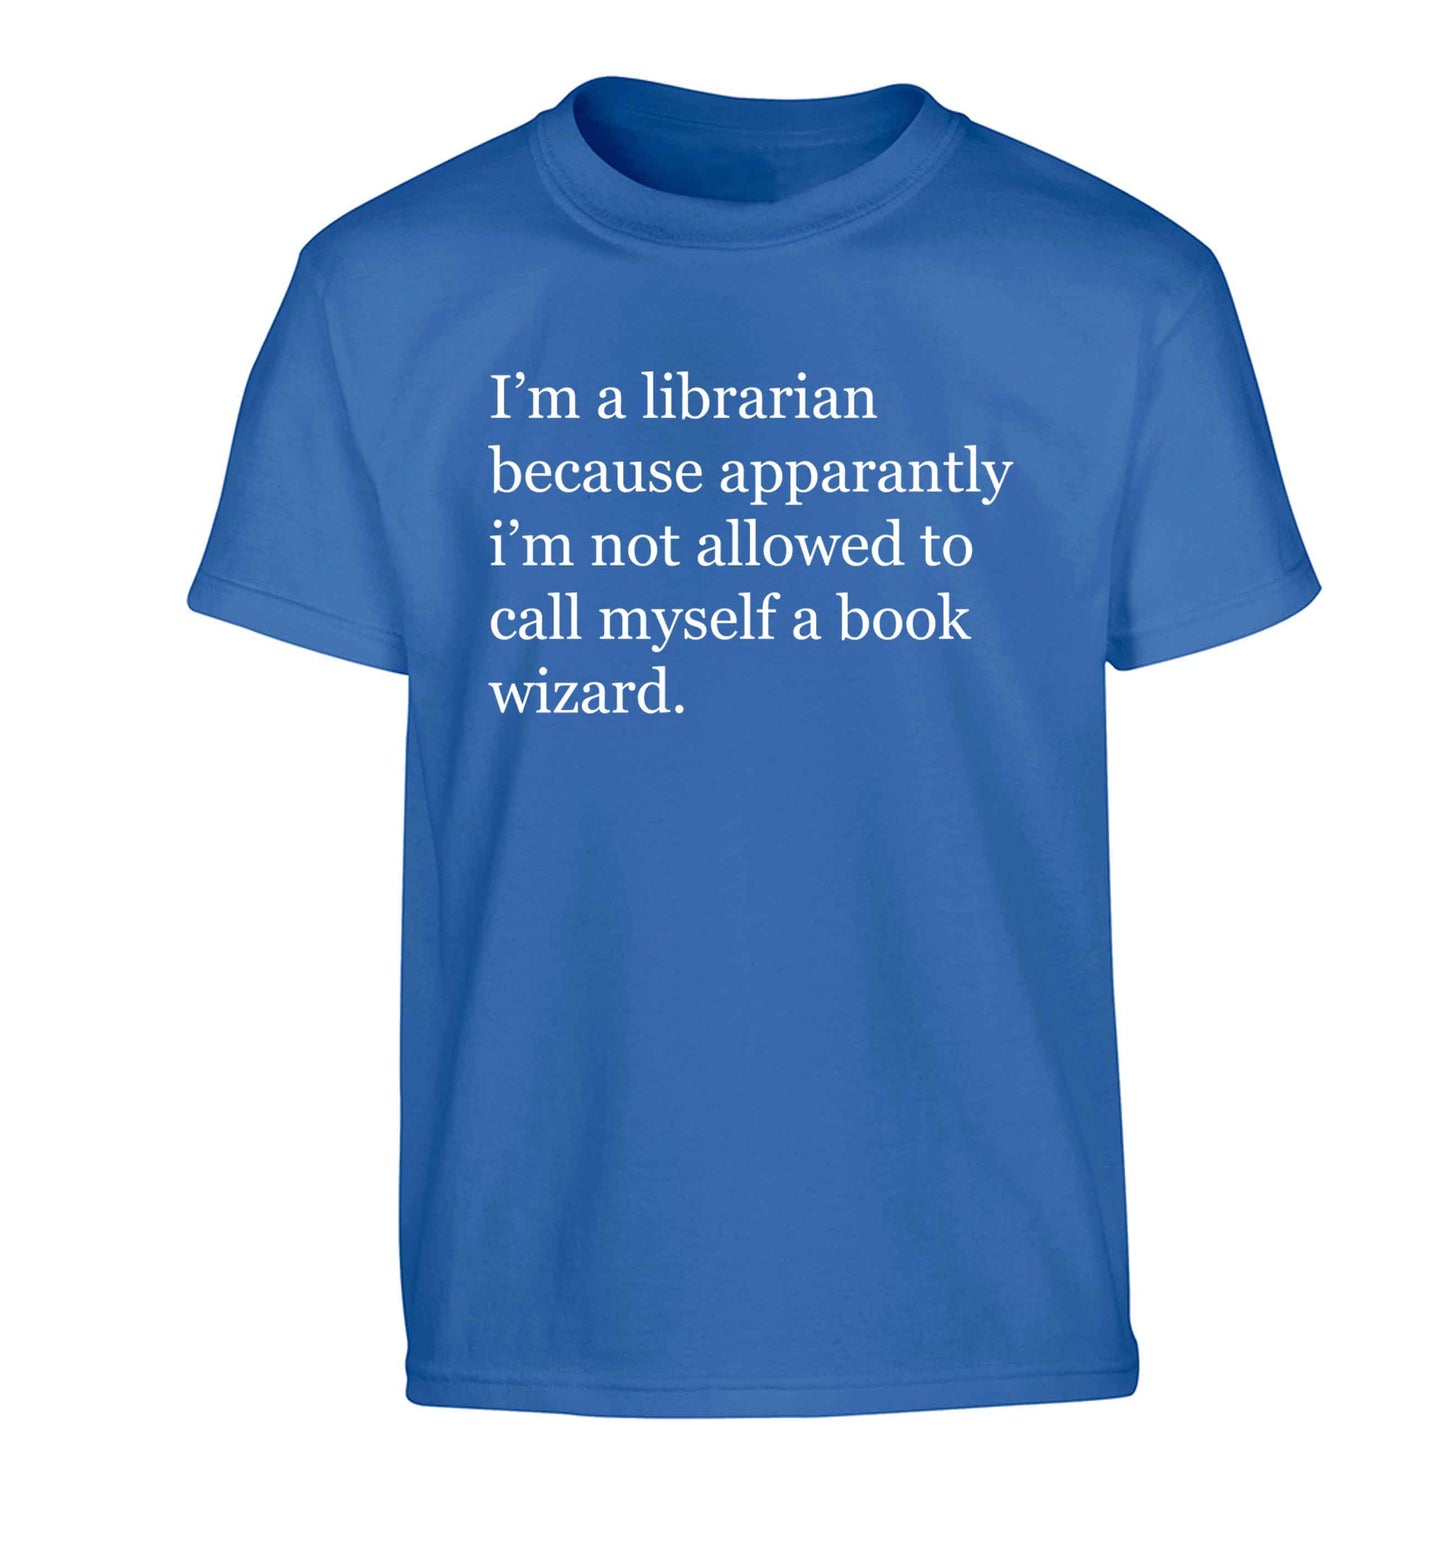 iÕm a librarian because apparantly iÕm not allowed to call myself a book wizard Children's blue Tshirt 12-13 Years